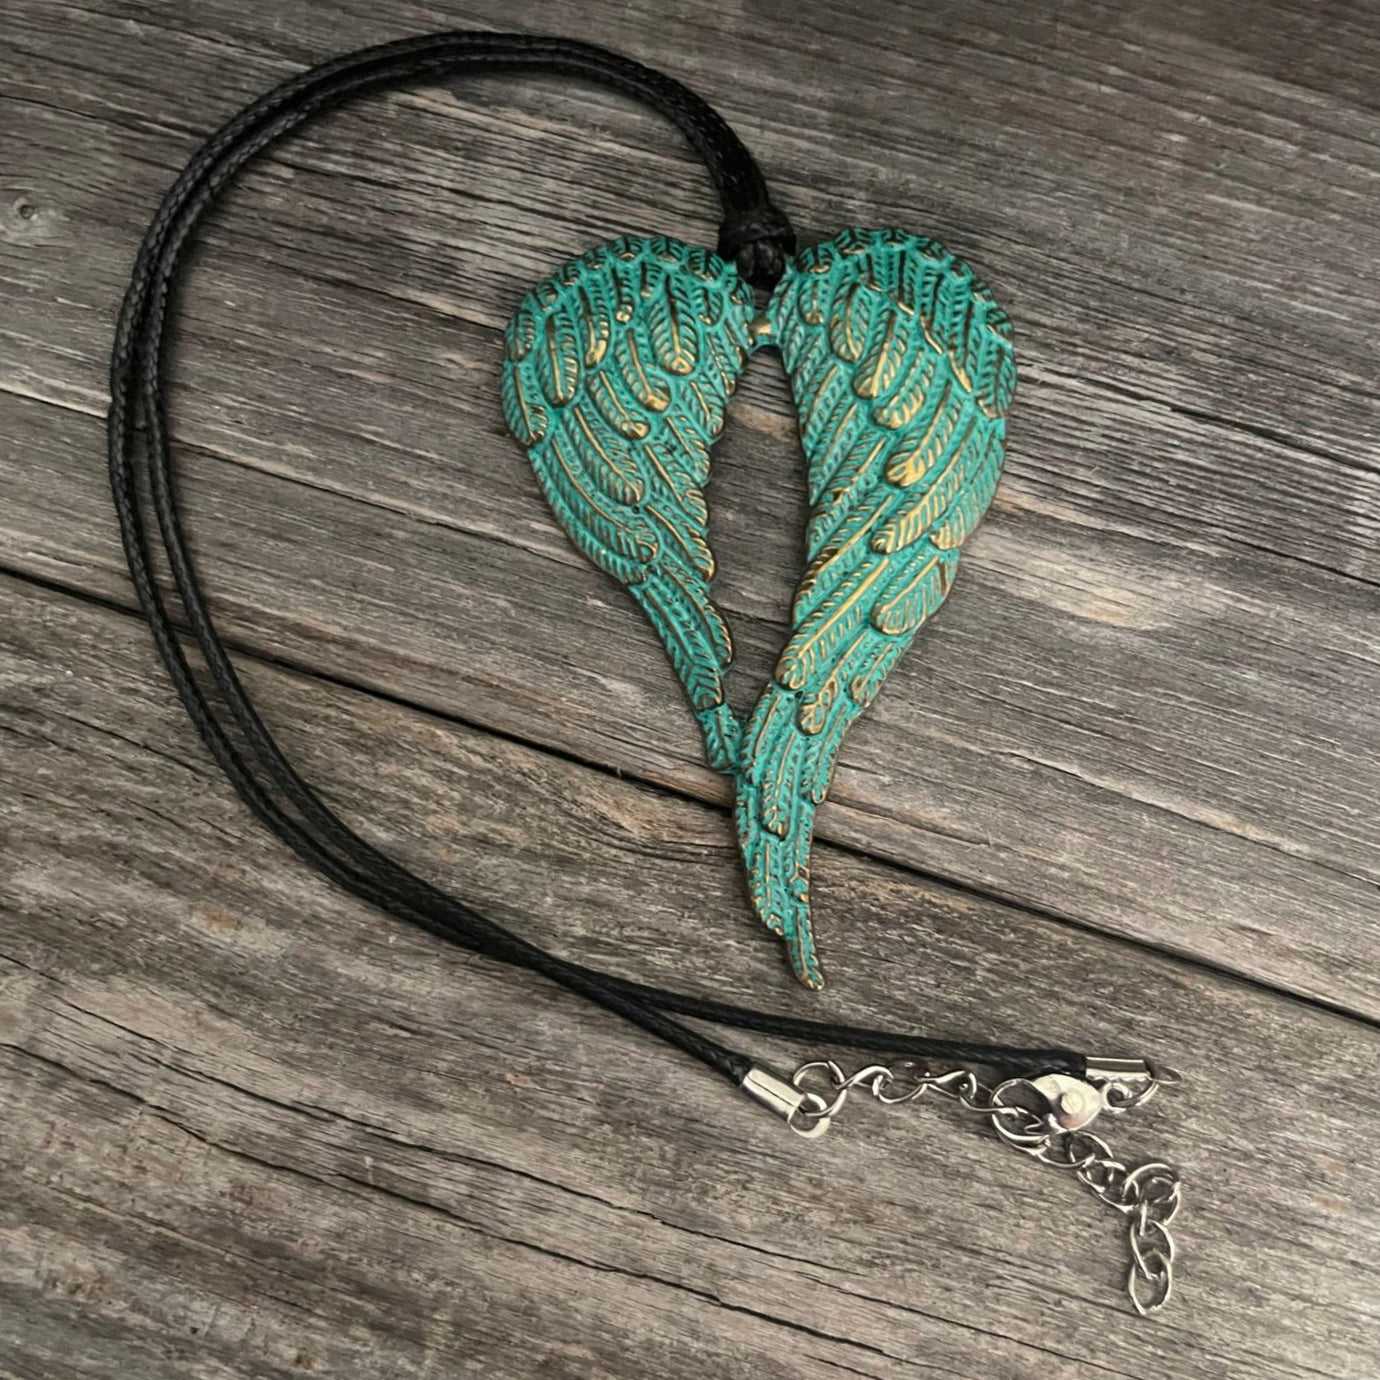 Vintage Turquoise “Wings*Heart” Pendant, Black Leather Rope Necklace